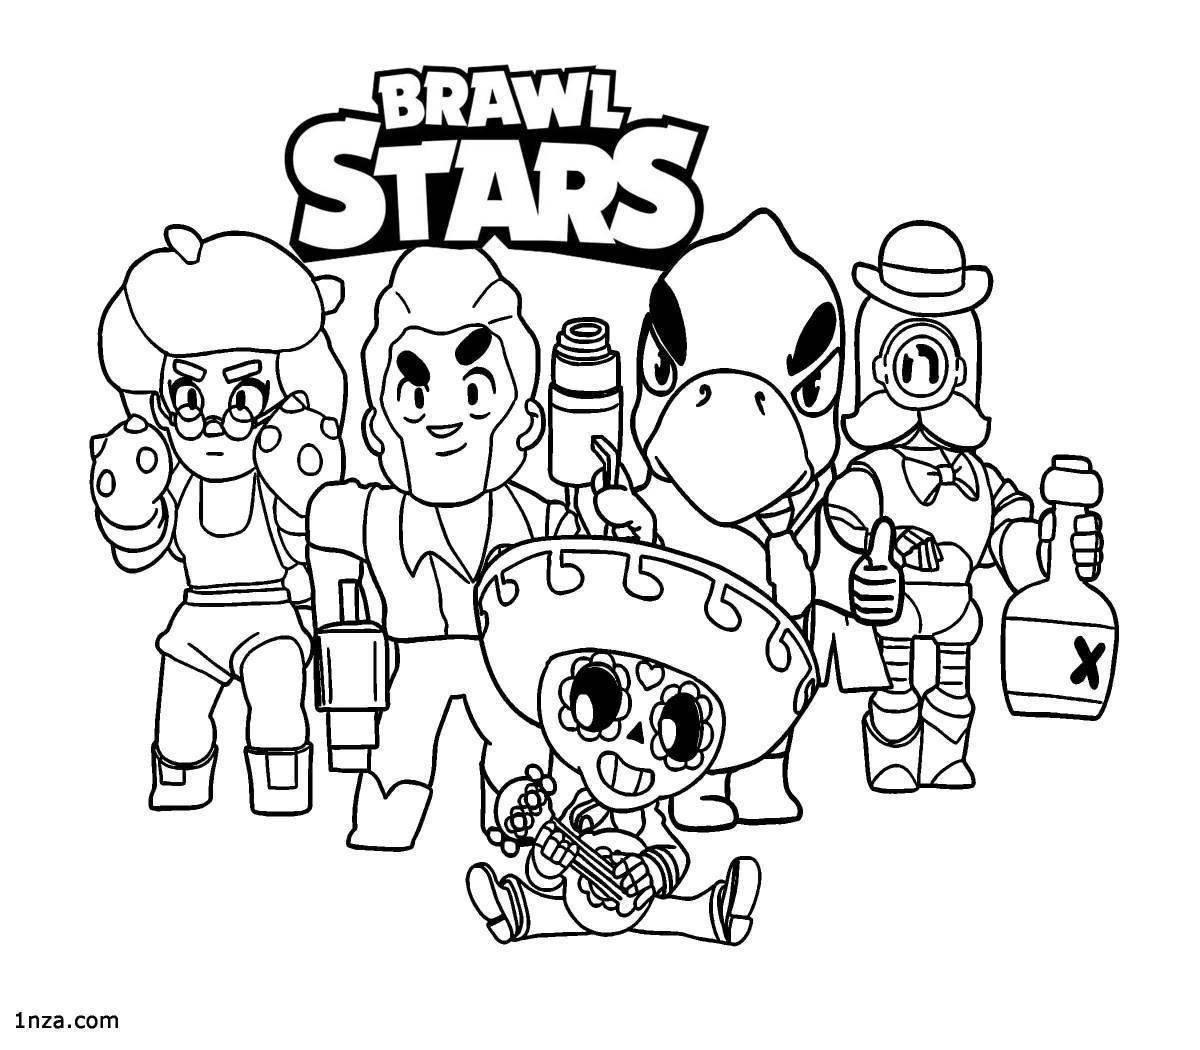 Exciting coloring pages with bravo stars stickers